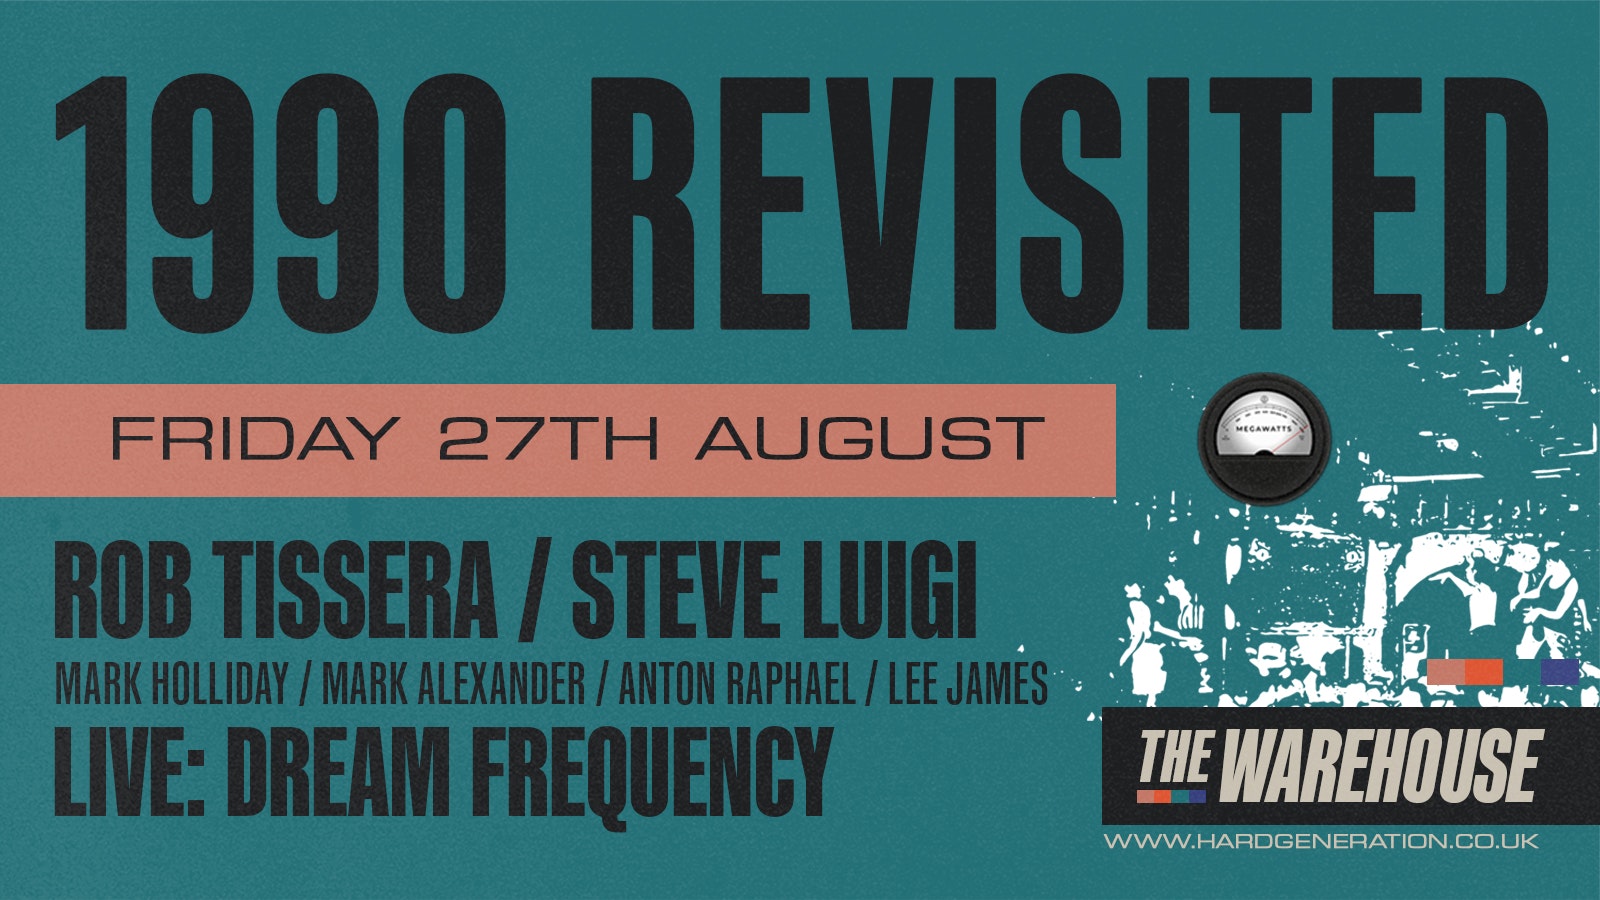 1990 REVISITED – Live & Club